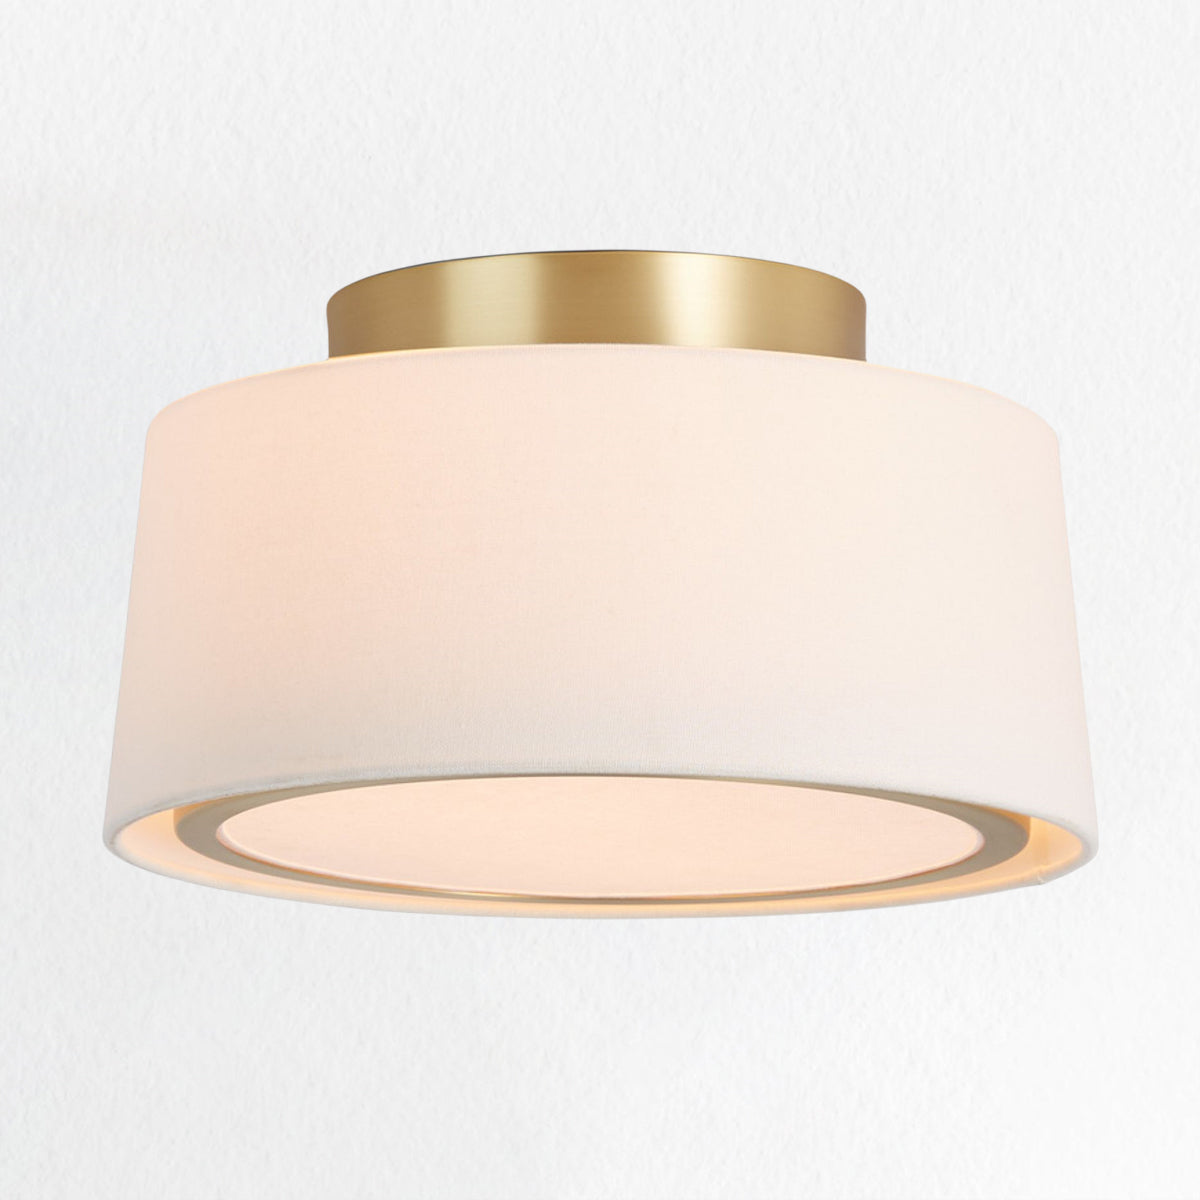 Glow Cone Ceiling Lamp - Pacific Northwest-Inspired Cone-Style Shade for Bedroom and Living Room Lighting